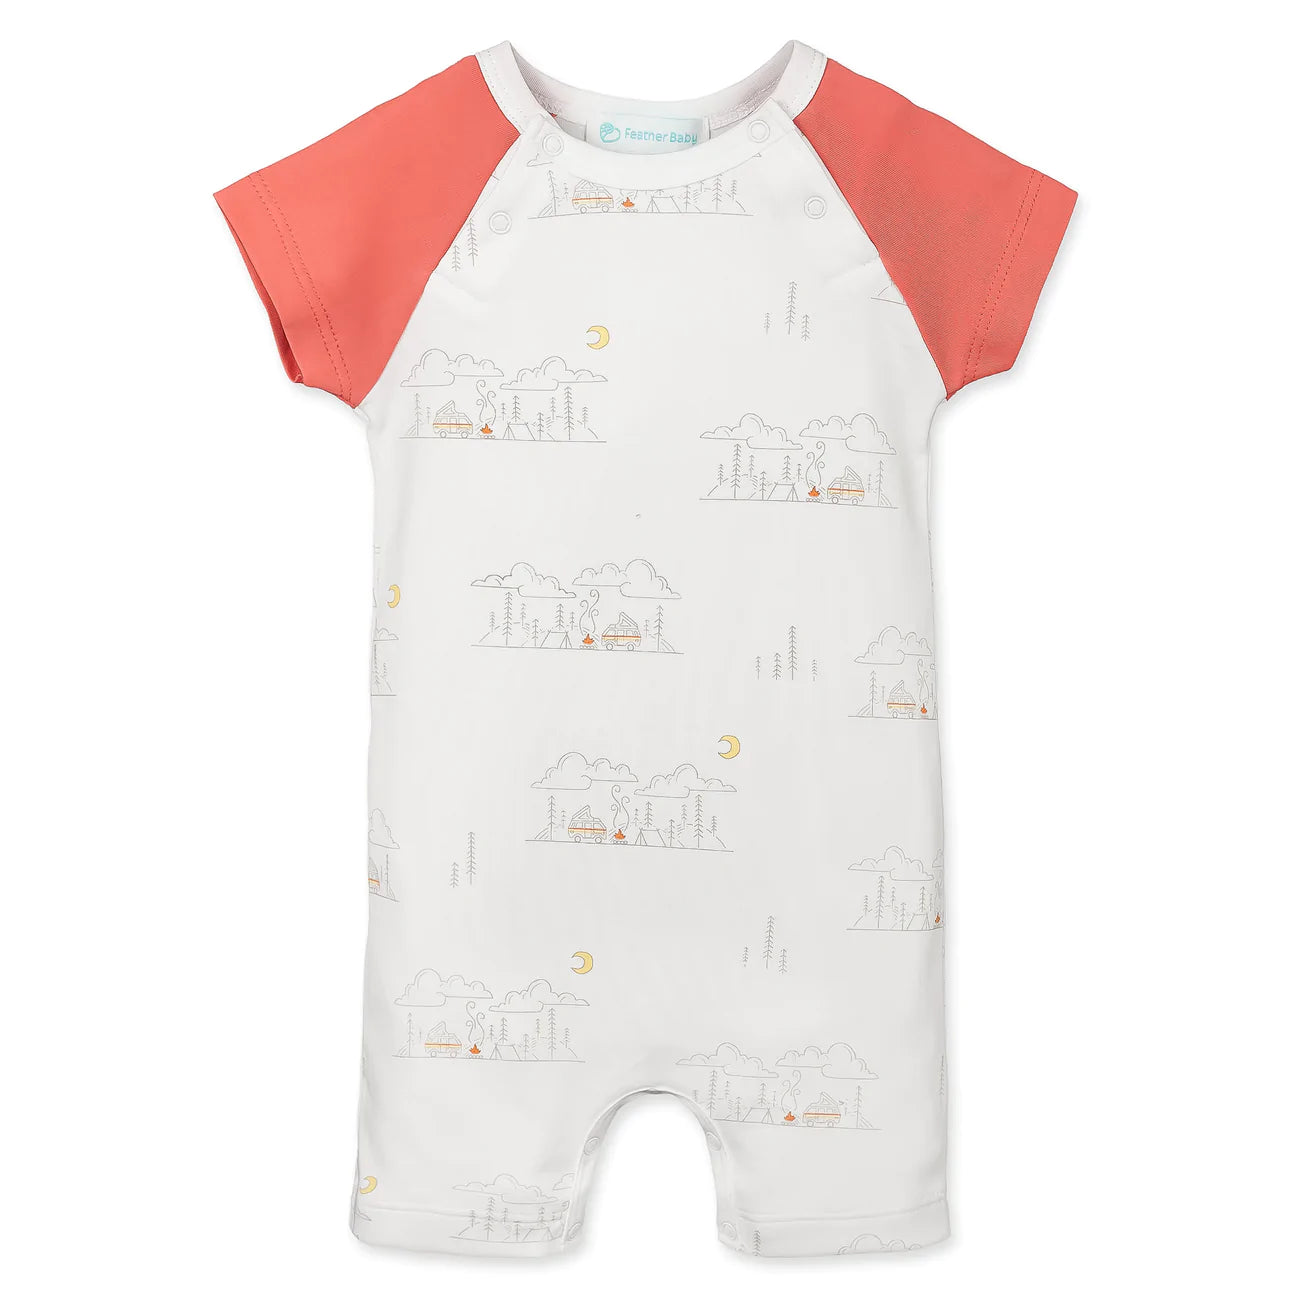 Feather Baby Sailor Romper - Campsite on White